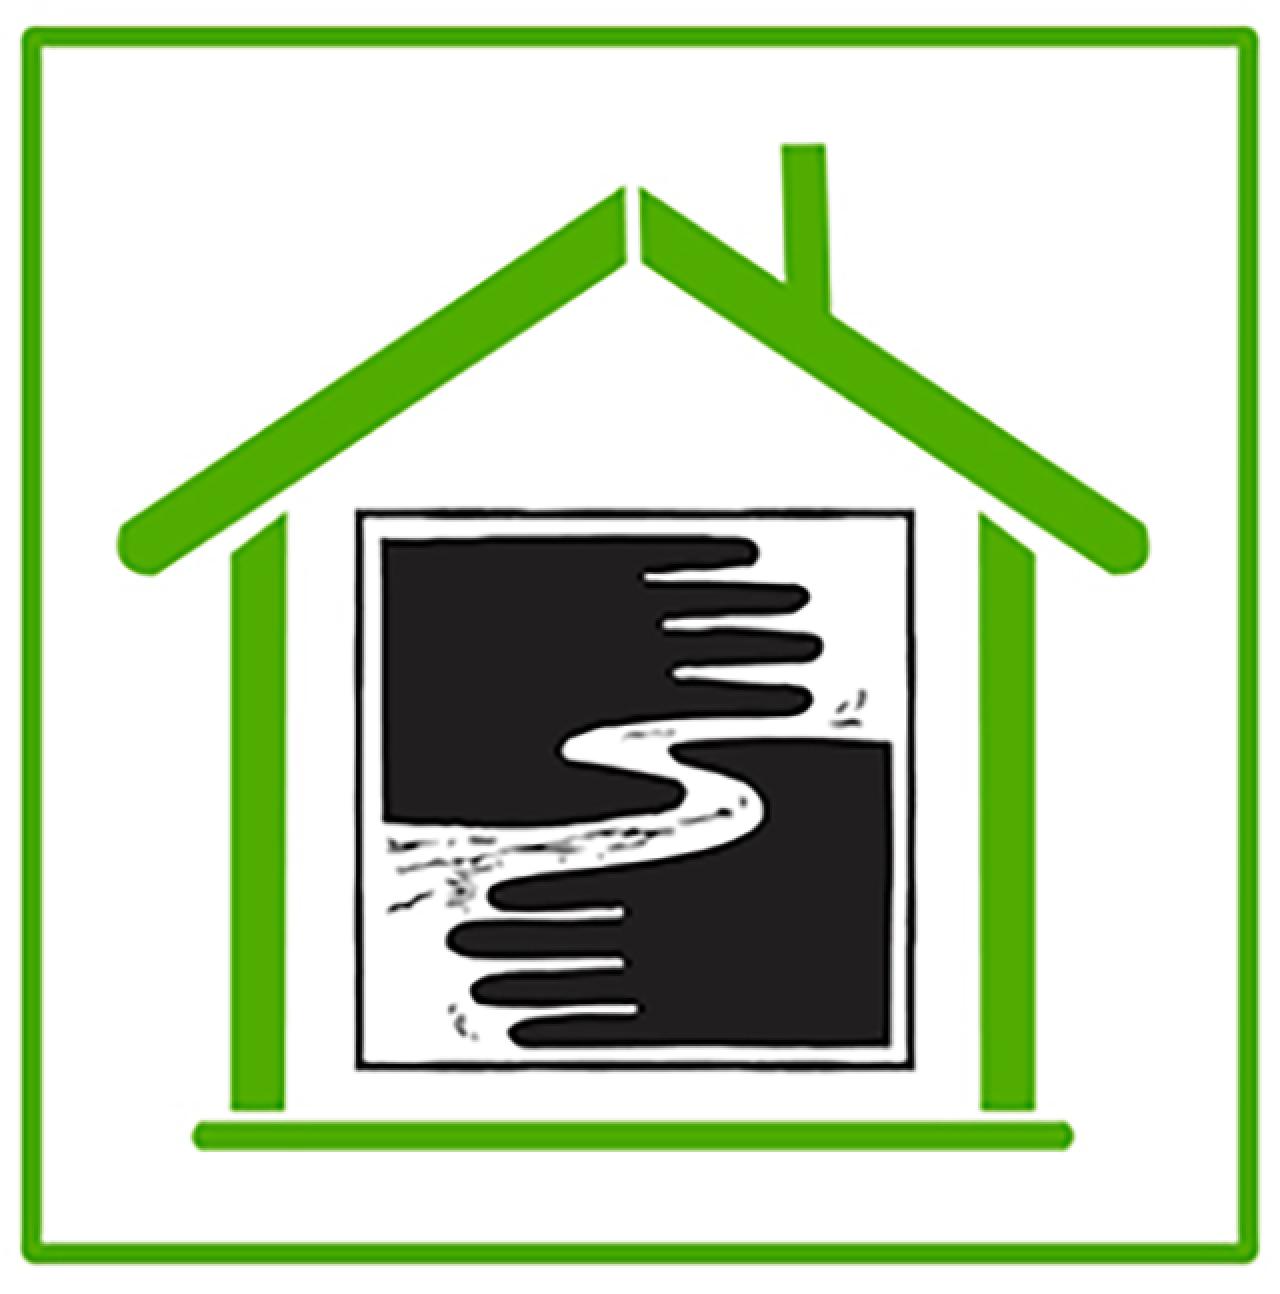 River-friendly homes and gardens workshop logo